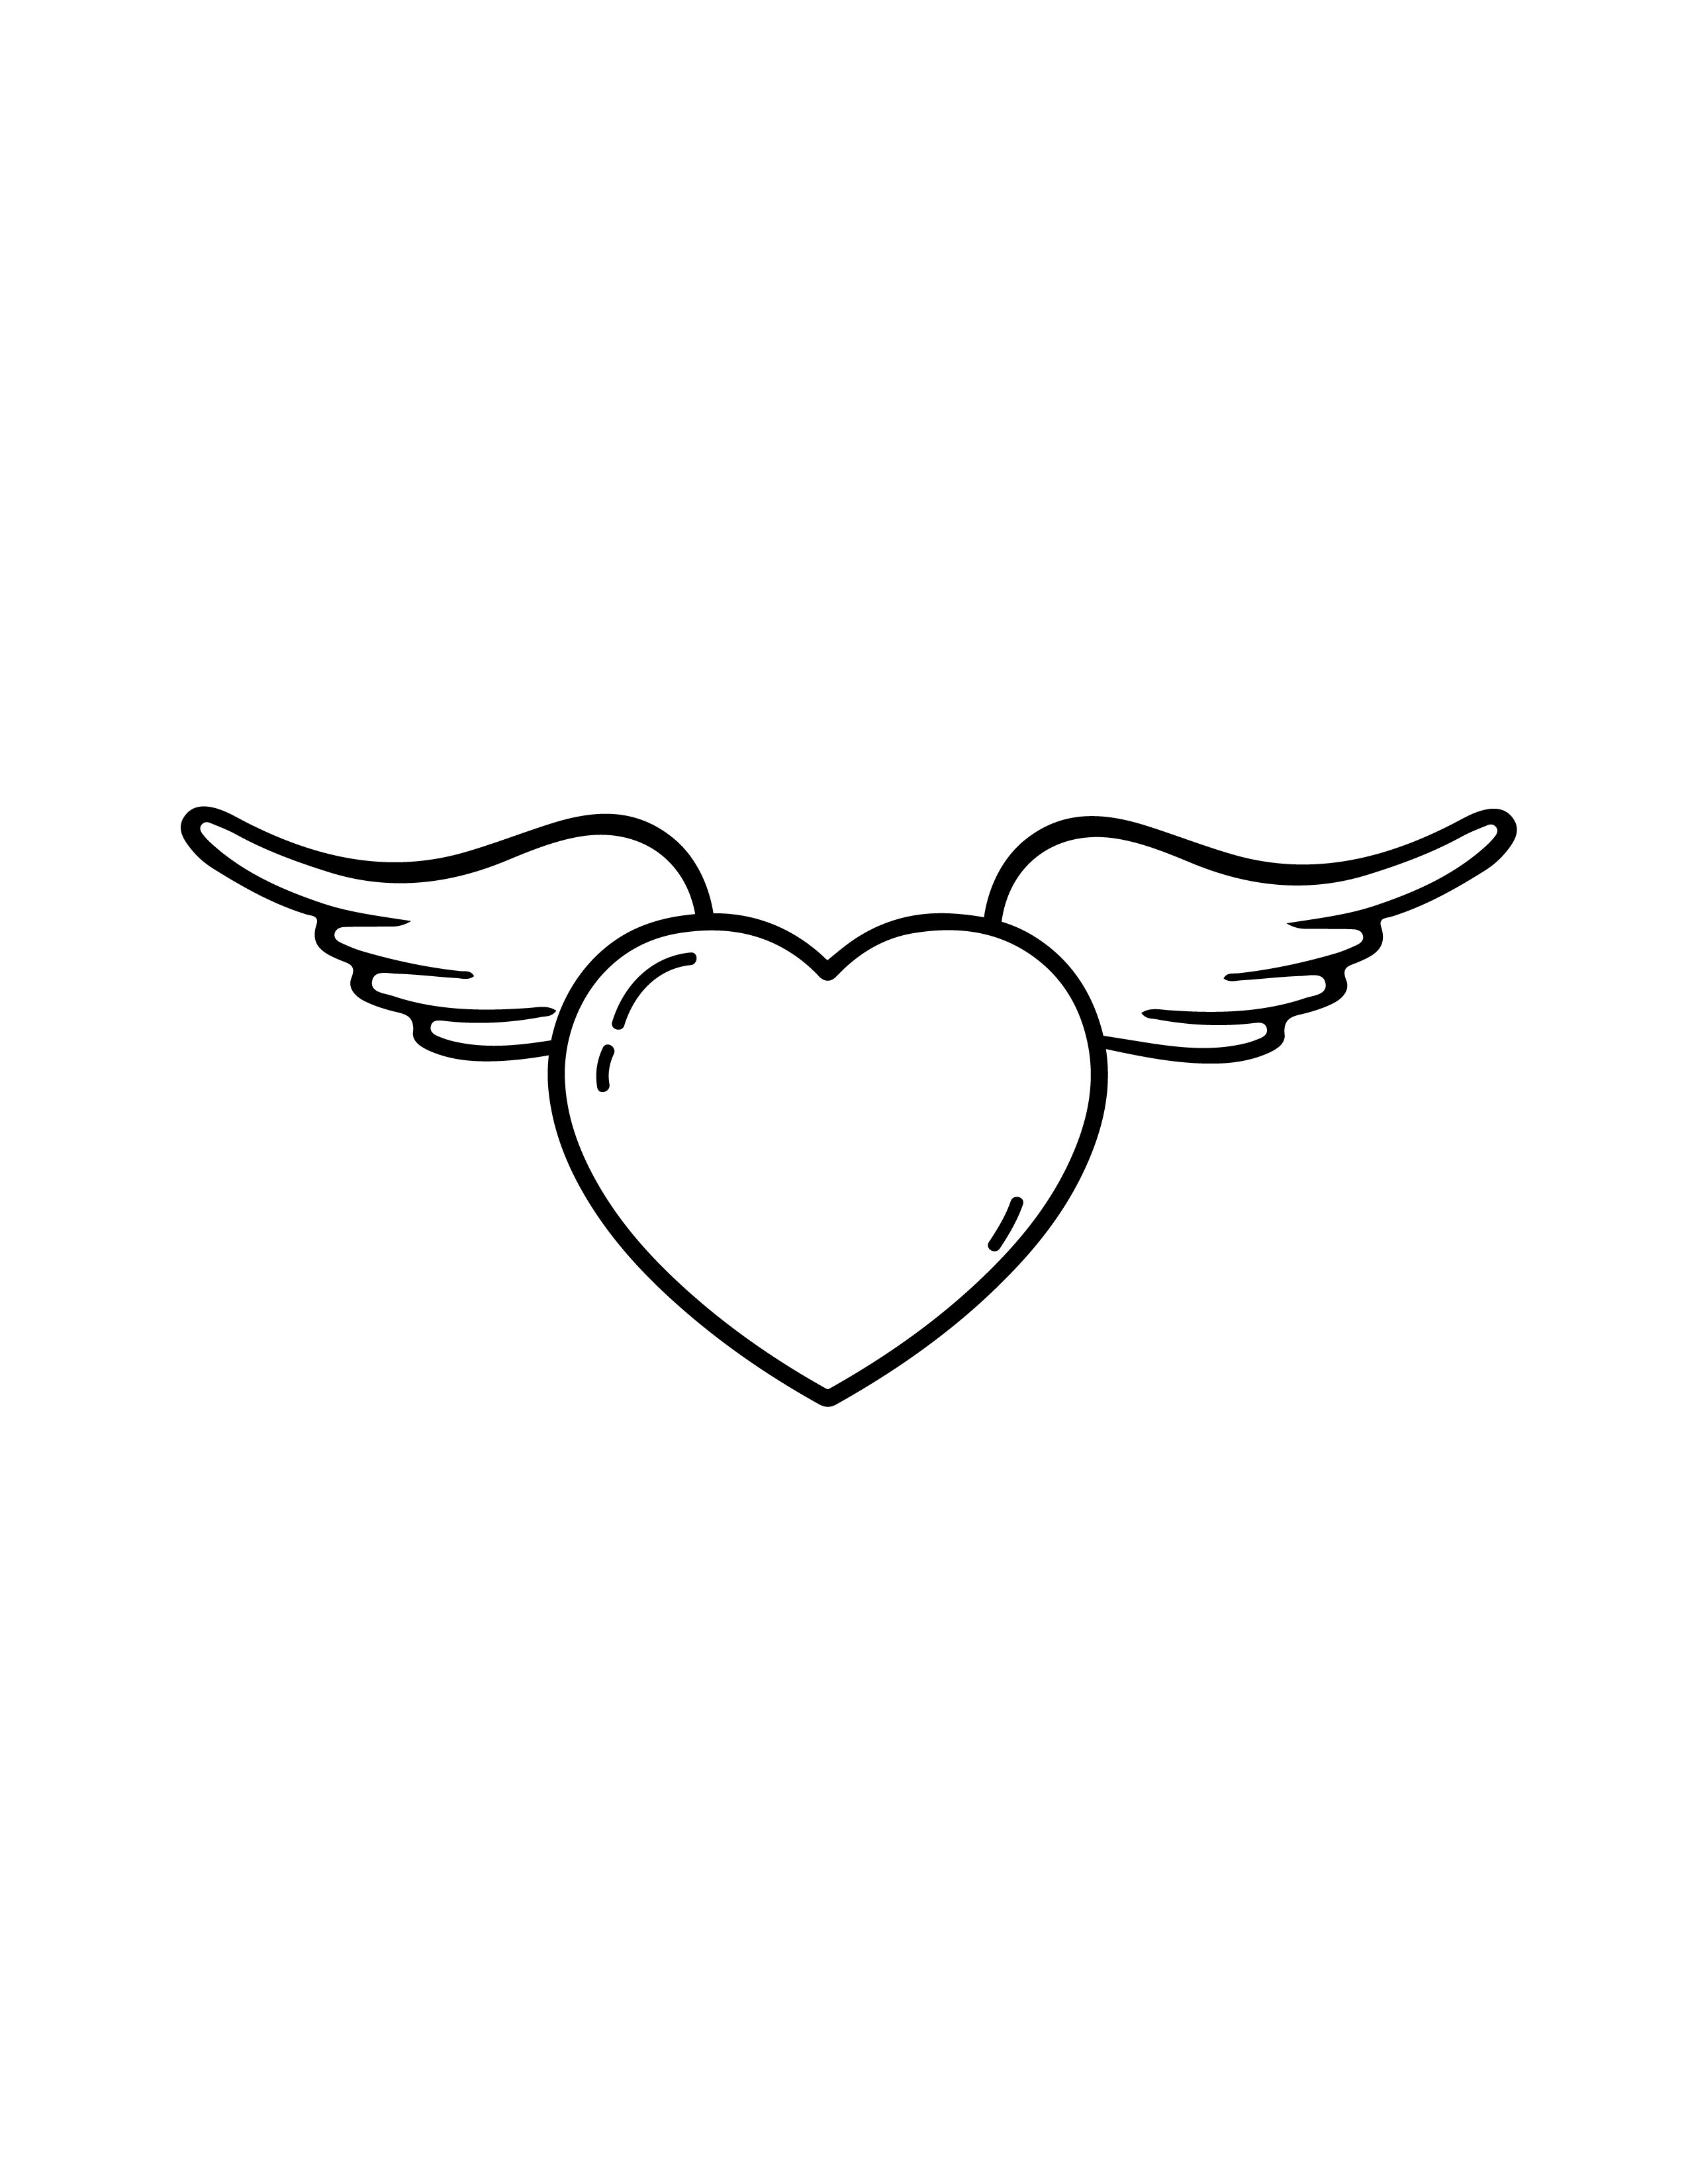 Free Love Drawing Heart With Wings - Download in PDF, Illustrator, EPS ...